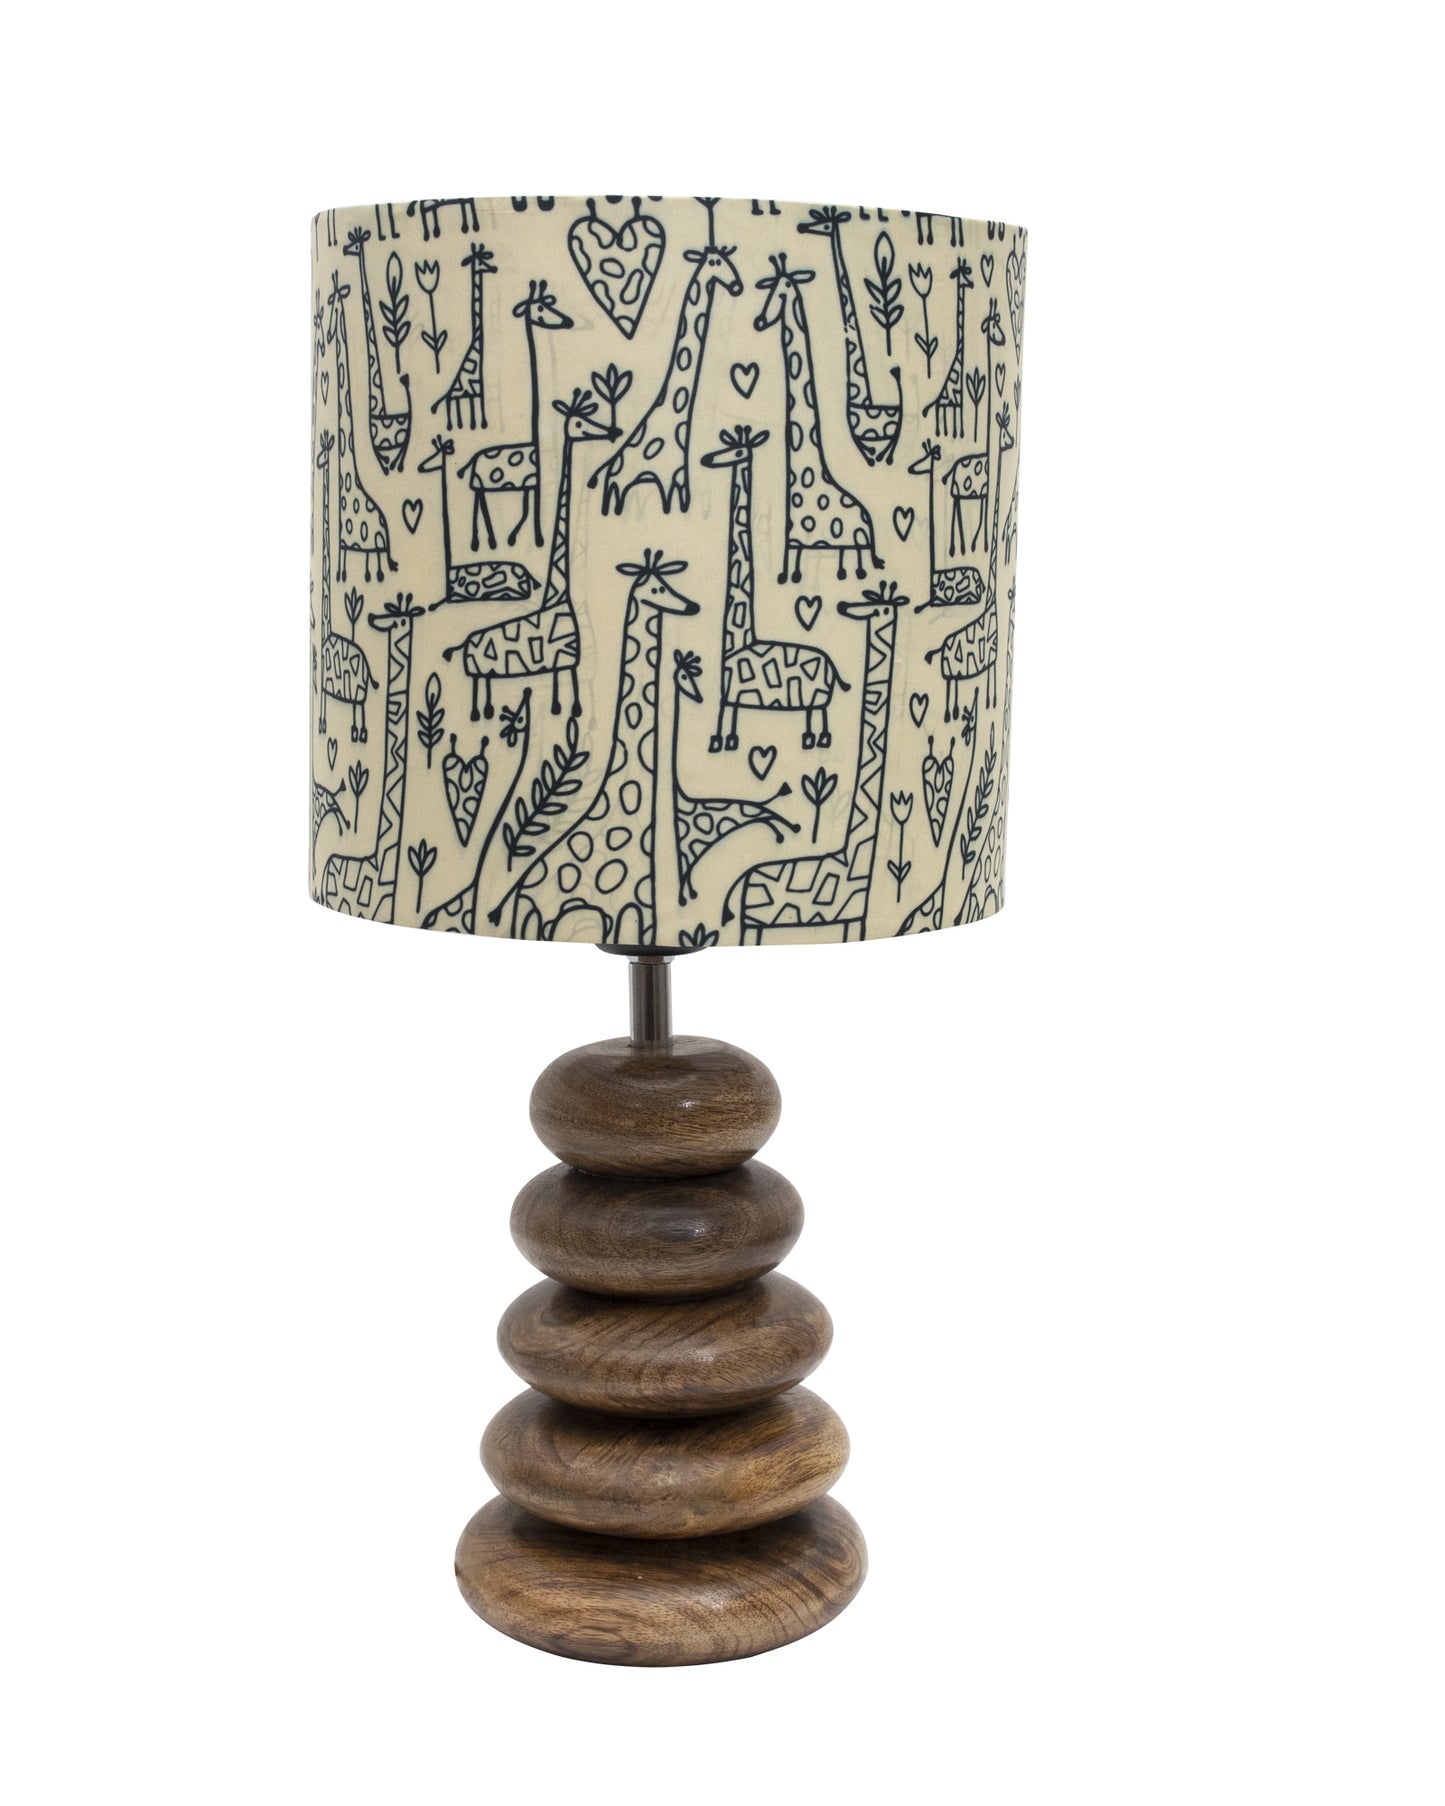 Wood Table Lamp French Country Rustic Bedside Desk Nightstand Lamp for Bedroom Living Room Office LED Bulb Included, Walnut Multi-Pebble